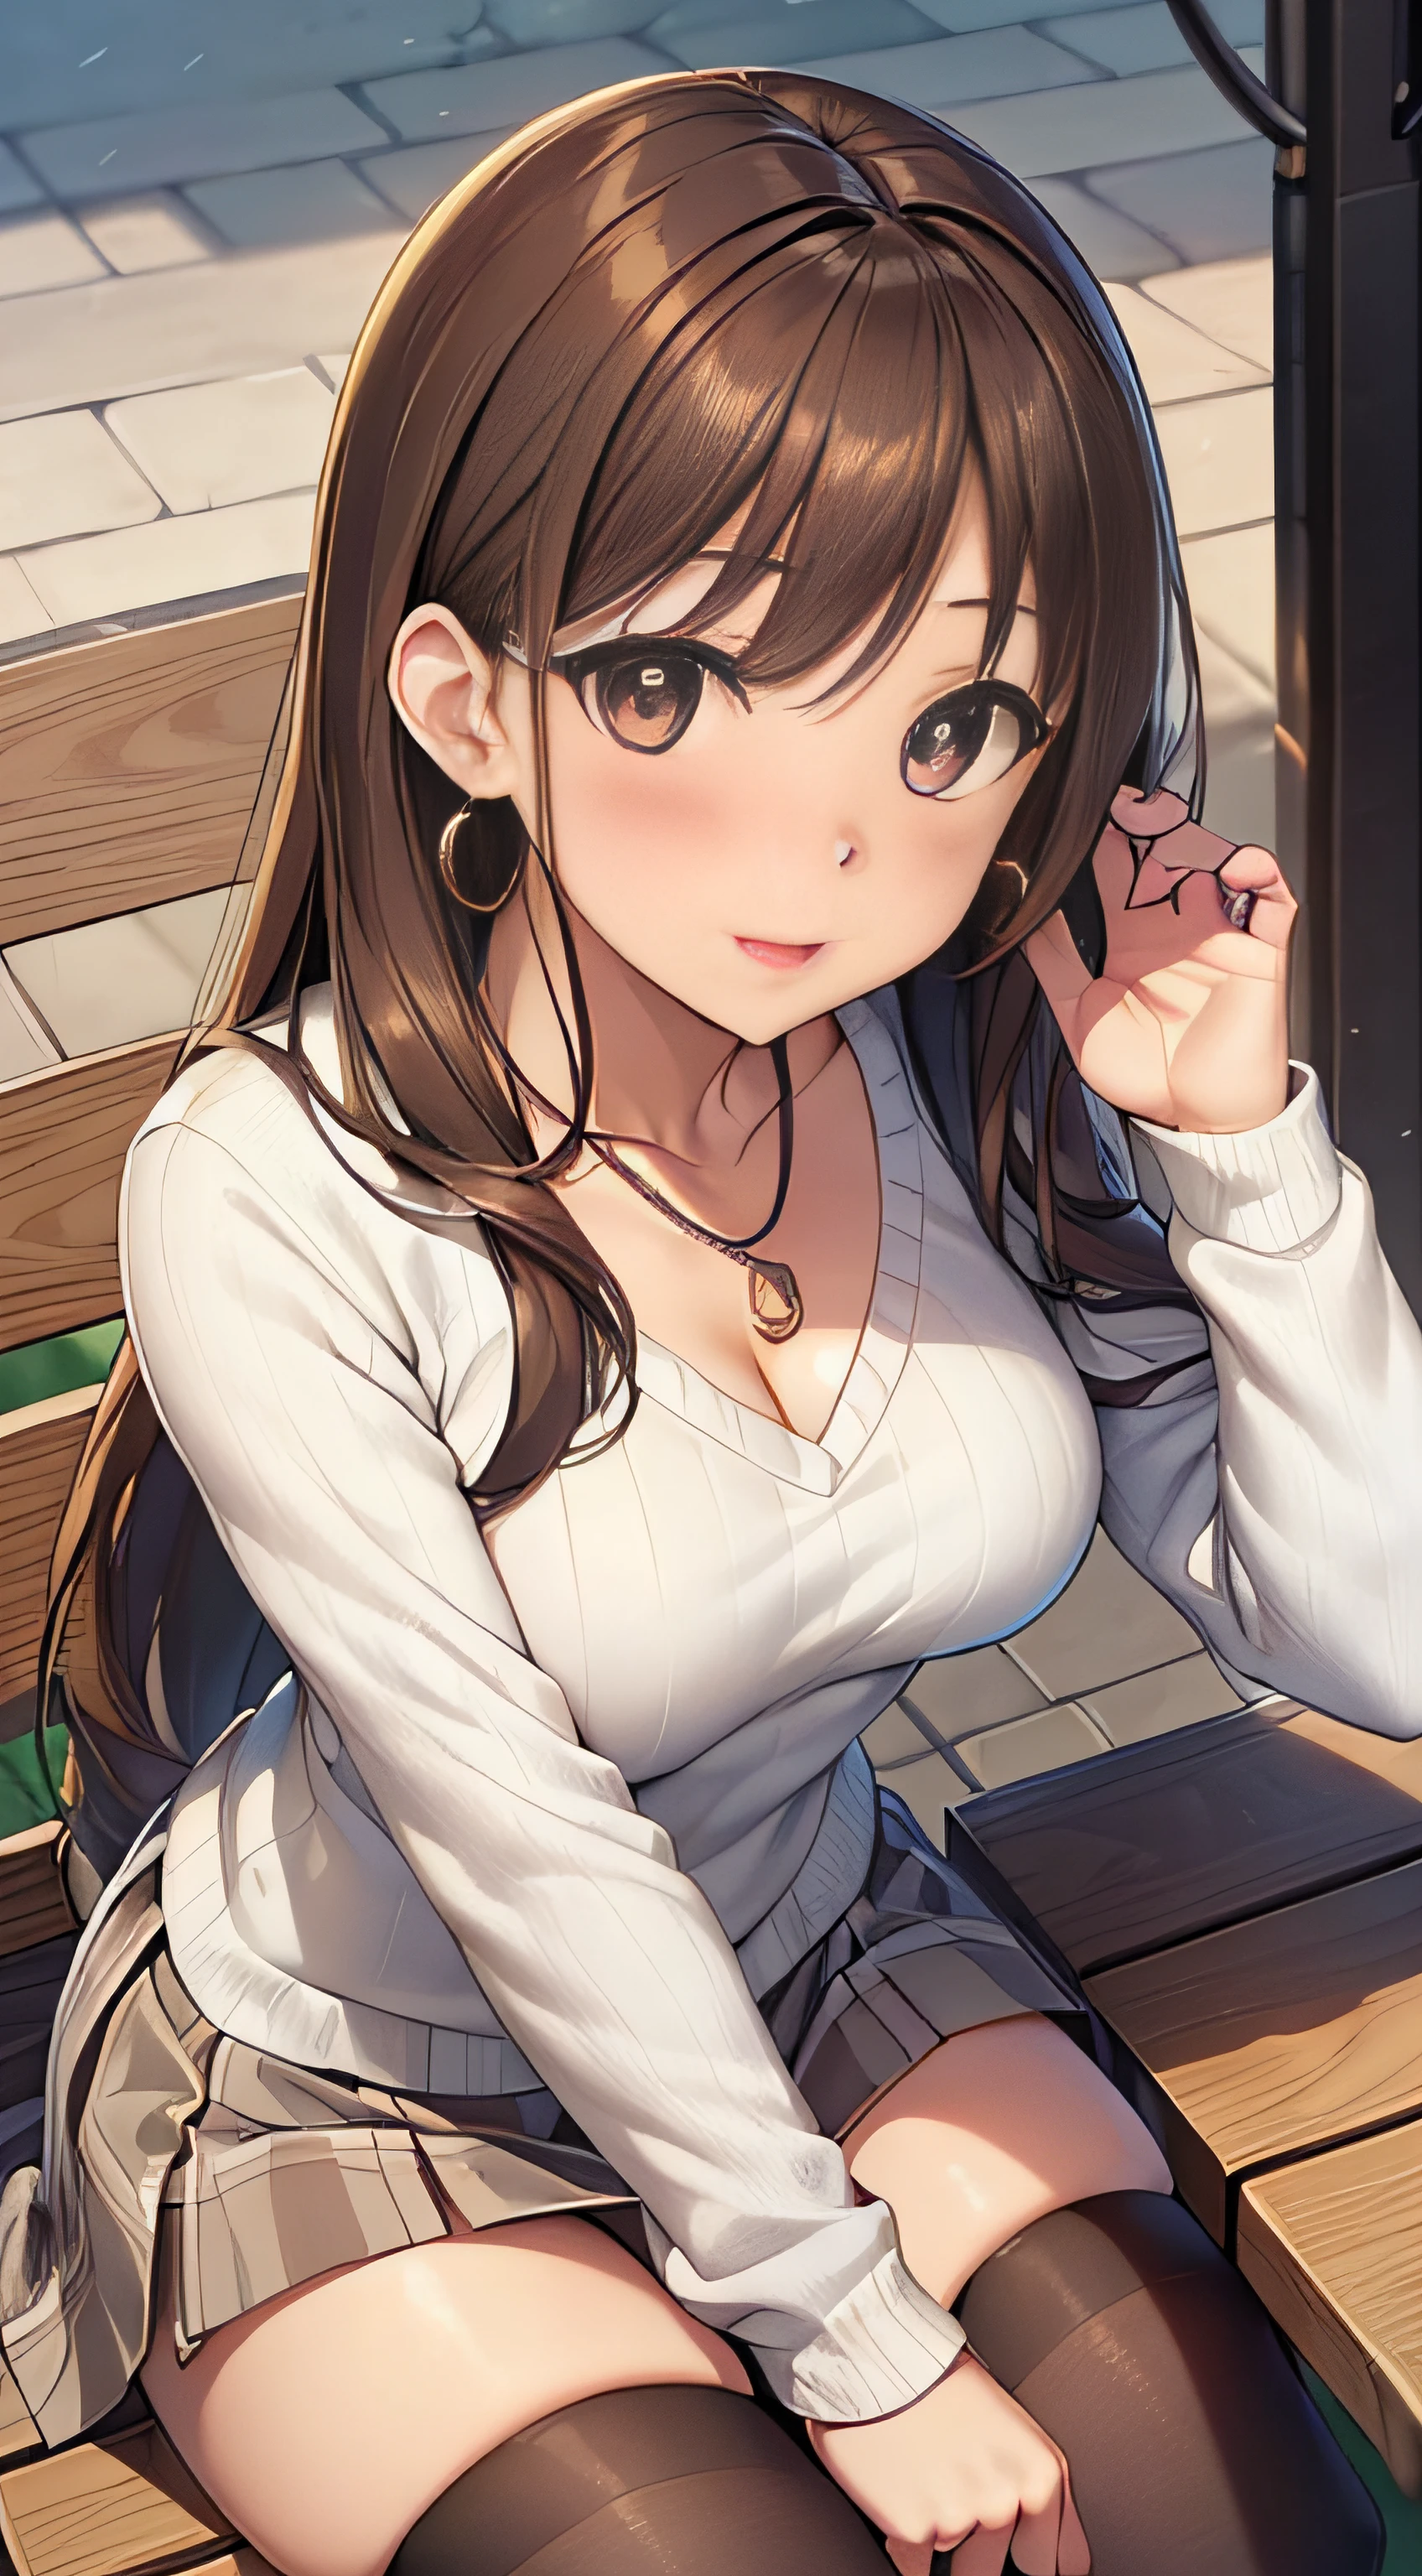 ((masutepiece, Best Quality, hight resolution, nffsw, Perfect Pixel, depth of fields, 4K, nffsw, nffsw)), 1girl in, Single, Solo,  Beautiful Art Style, ((Long hair, Brown hair)), (eyes are brown:1.4, rounded eyes, Beautiful eyelashes, Realistic eyes), (Detailed face, Blushing:1.2), (Smooth texture:0.75, Realistic texture:0.65, Photorealistic:1.2, Anime CG style), ((tiny chest)), cleavage of the breast, (Dynamic Angle, Dynamic Pose:1.4, looking to viewer), Perfect body, (Thin leg)、((White sweater, Long sleeve, plaid skirts, Stockings)), Smile, Open mouth, (Leaning forward),, amusement park, a necklace, Rounded earrings、during a meal、sit a chair、frontage、(Leaning over the table)